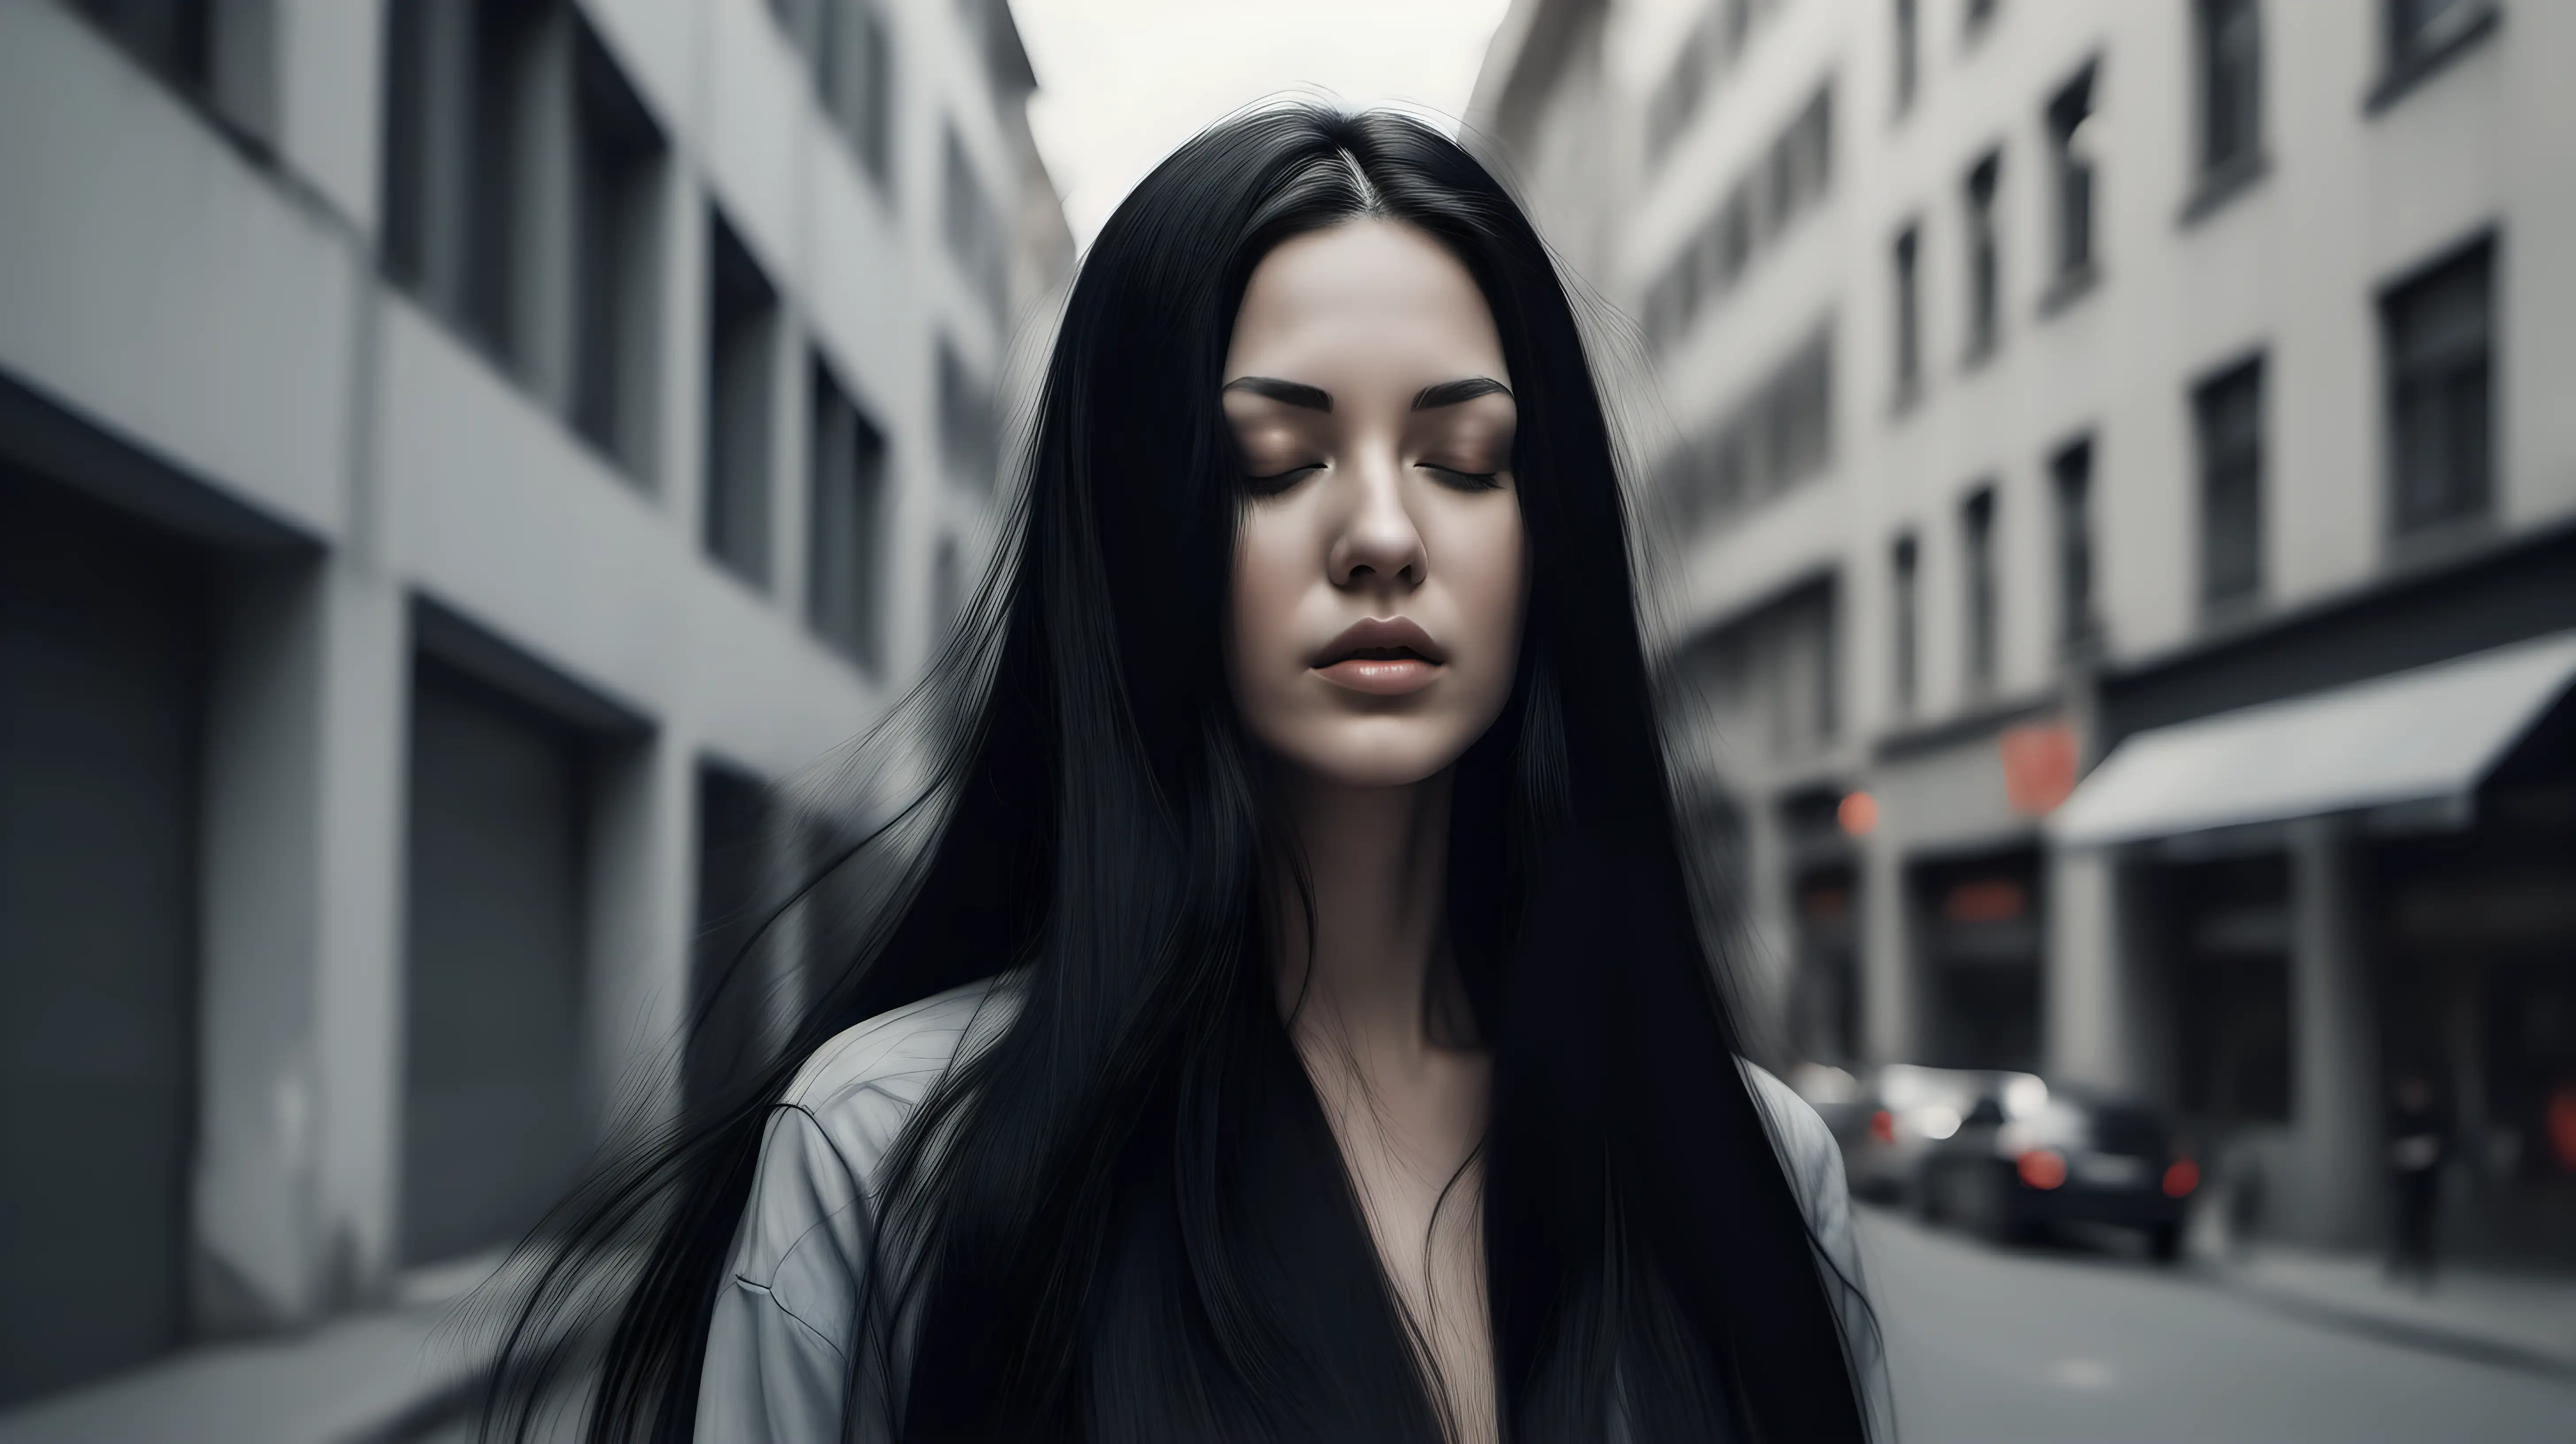 Ultrarealistic Portrait of a Caucasian Woman with Closed Eyes in a Large Urban Street